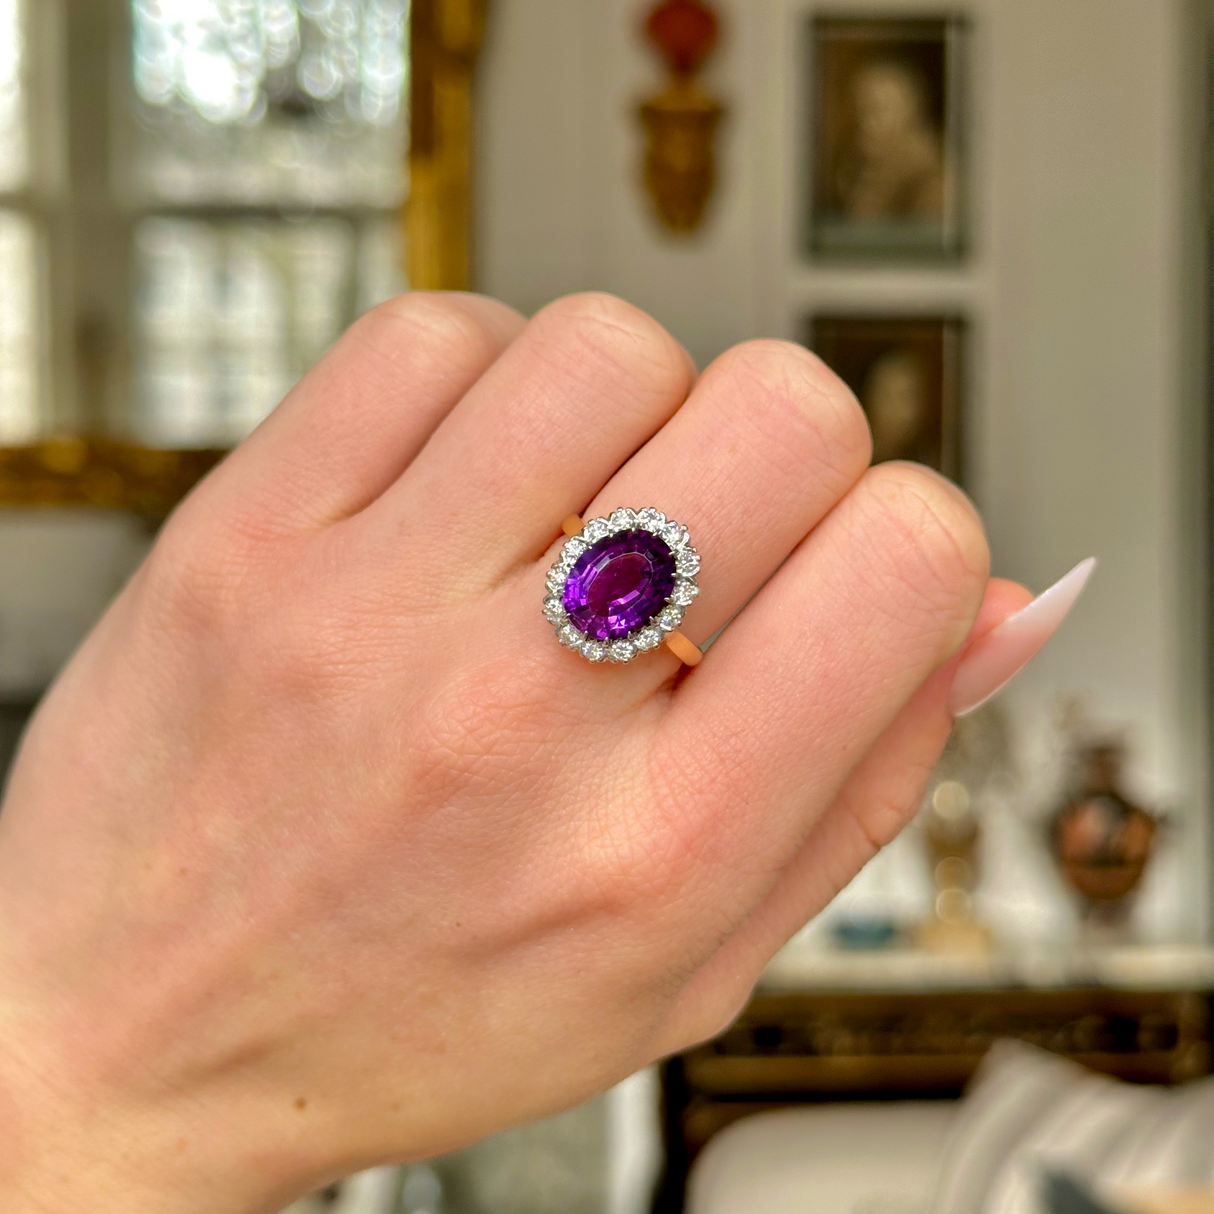 Vintage amethyst and diamond cluster ring, worn on closed hand. 